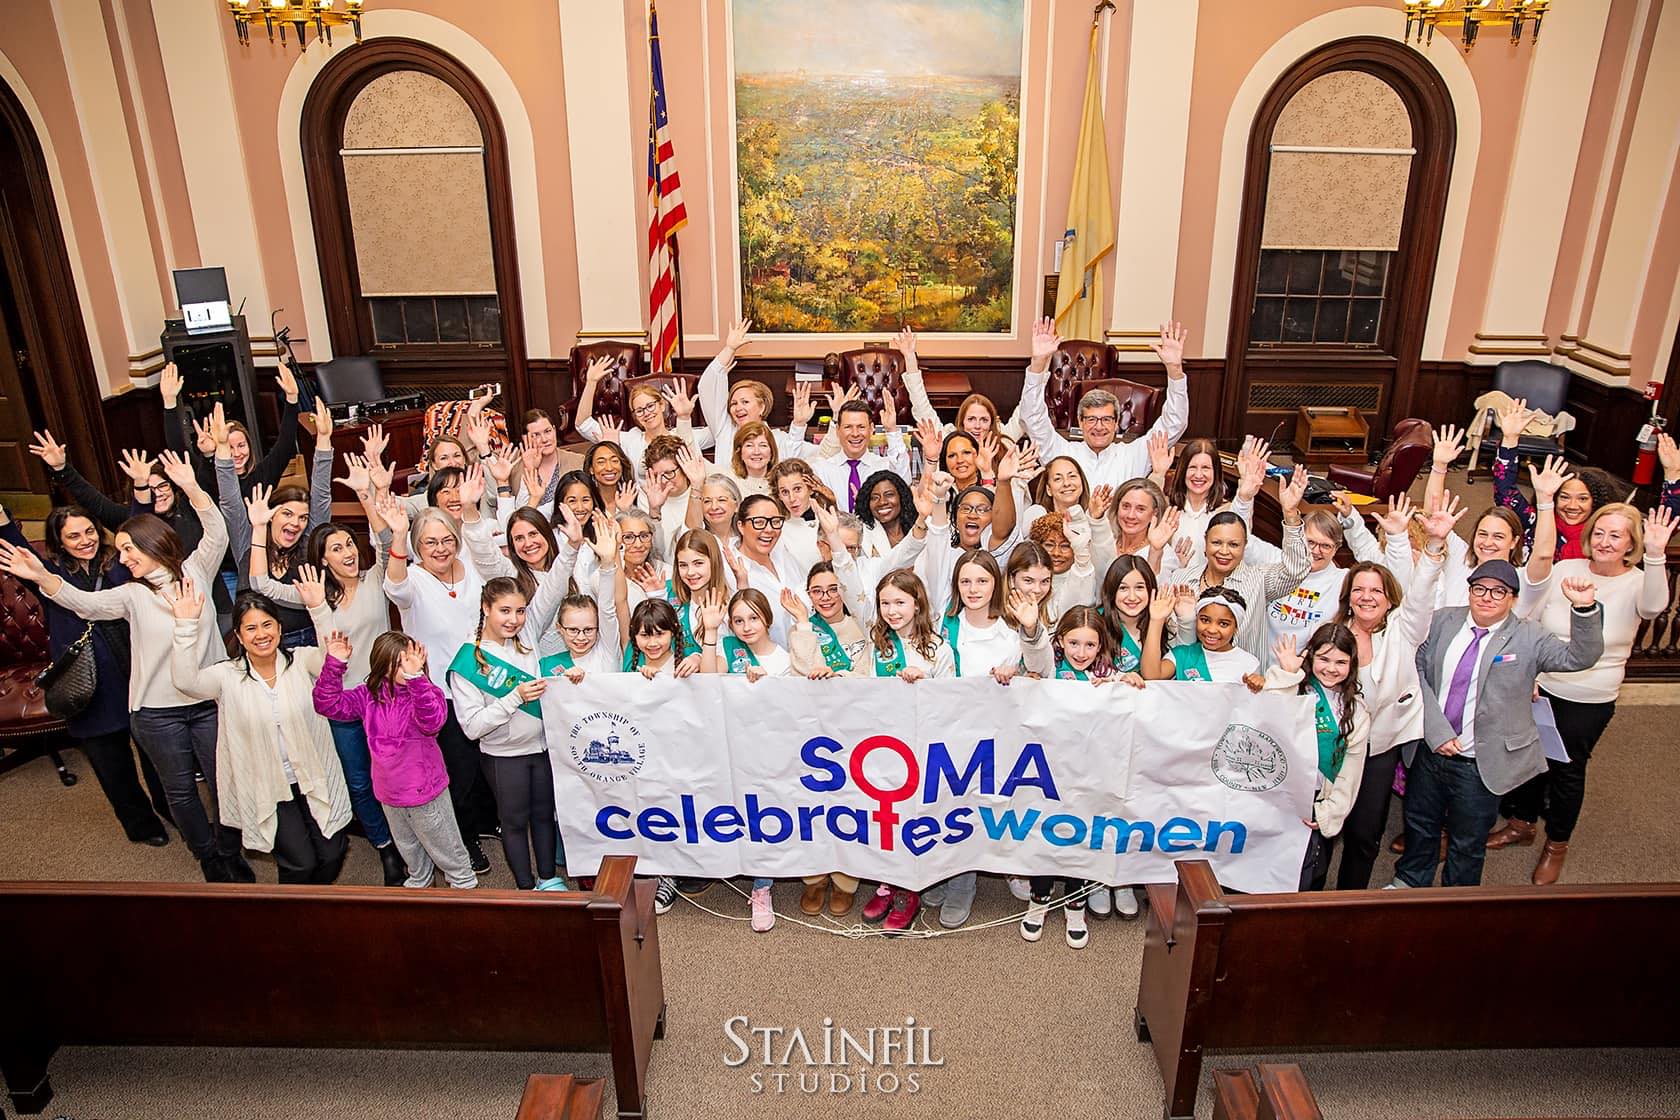 South Orange and Maplewood Celebrate Women – 2020 is the Year of the Woman